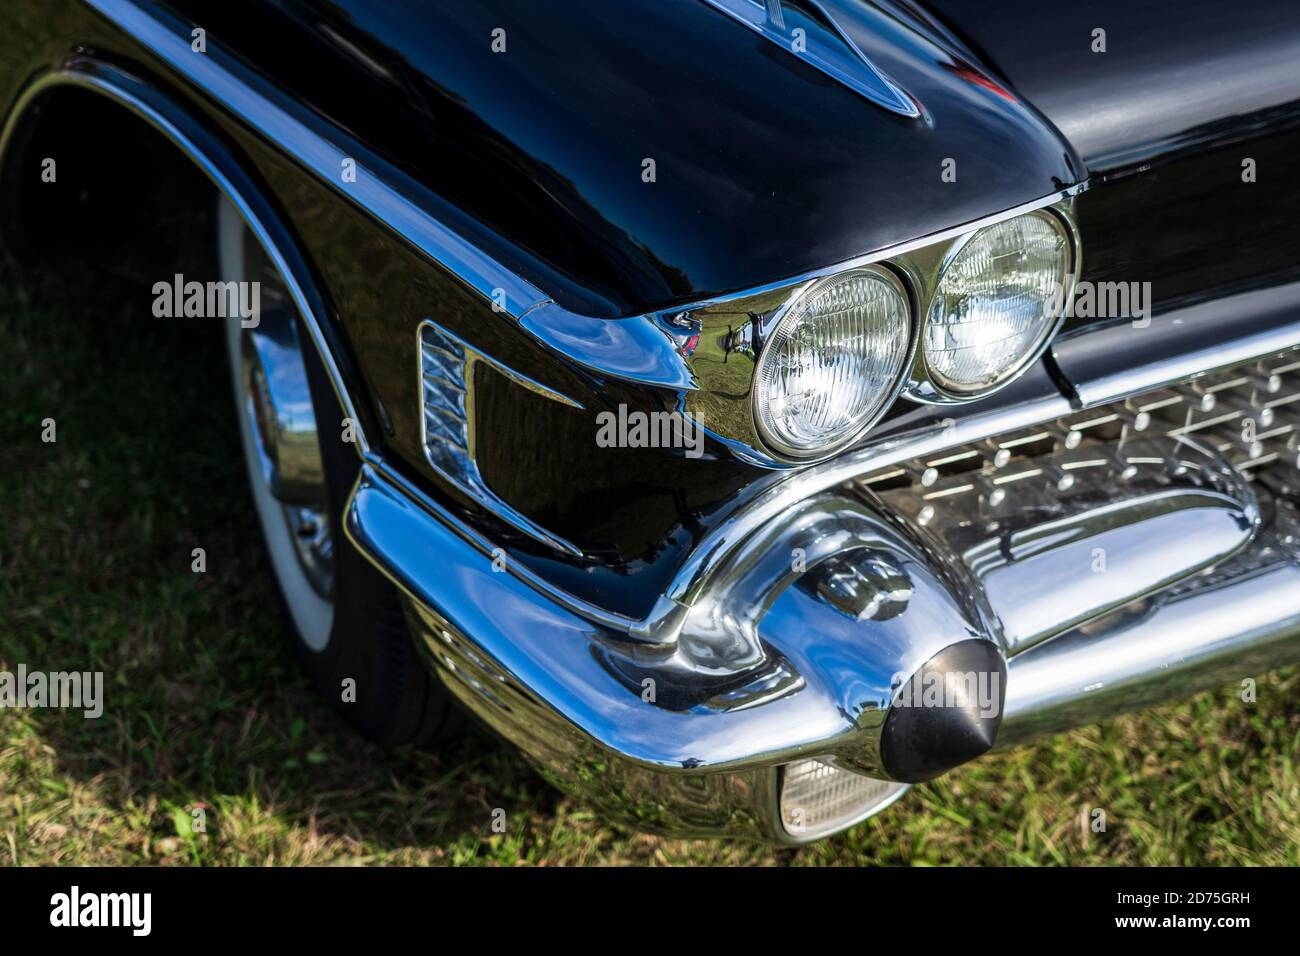 PAAREN IM GLIEN, GERMANY - OCTOBER 03, 2020: Headlights of a full-size luxury car Cadillac Sixty Special, 1958. Die Oldtimer Show 2020. Stock Photo